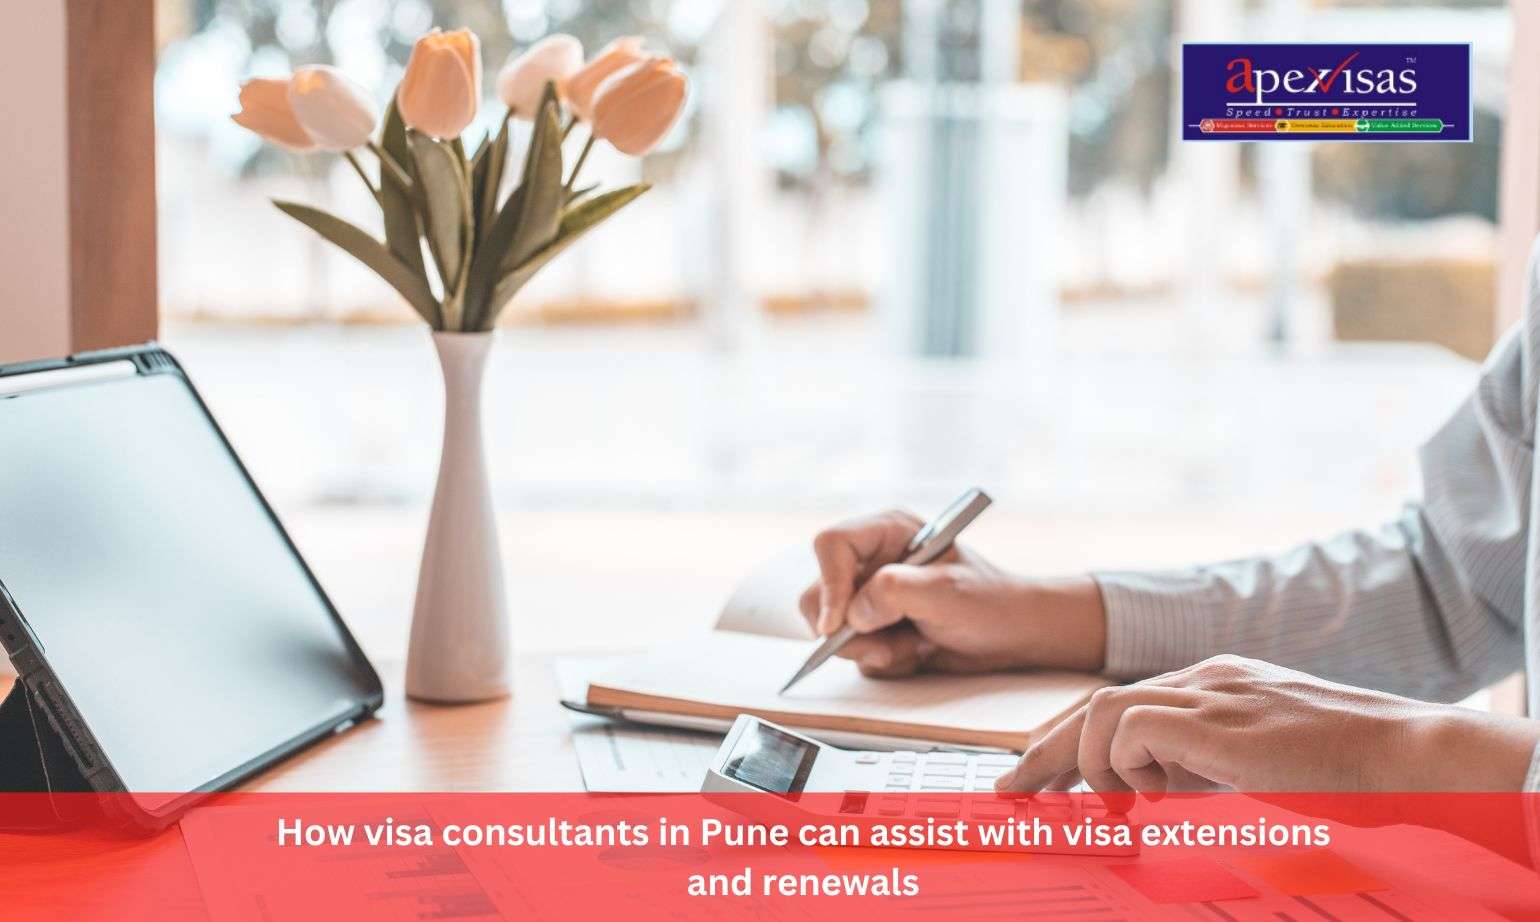 How visa consultants in Pune can assist with visa extensions and renewals